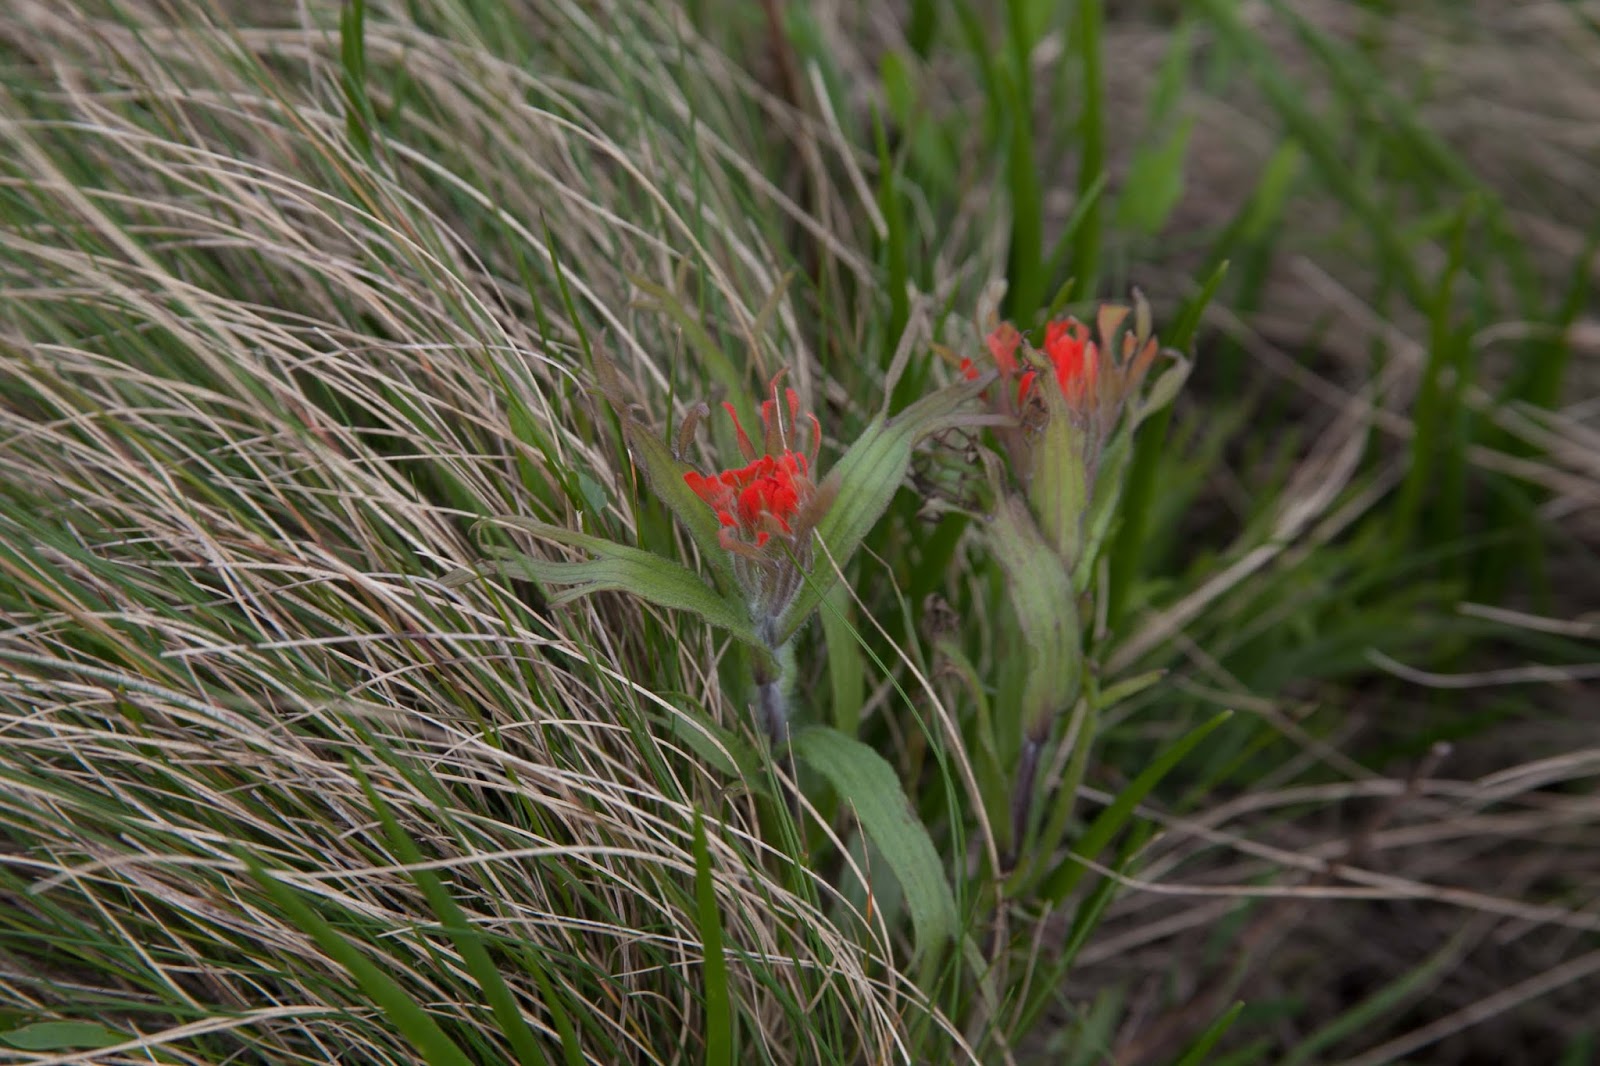  Paintbrush and Roemer's fescue. 